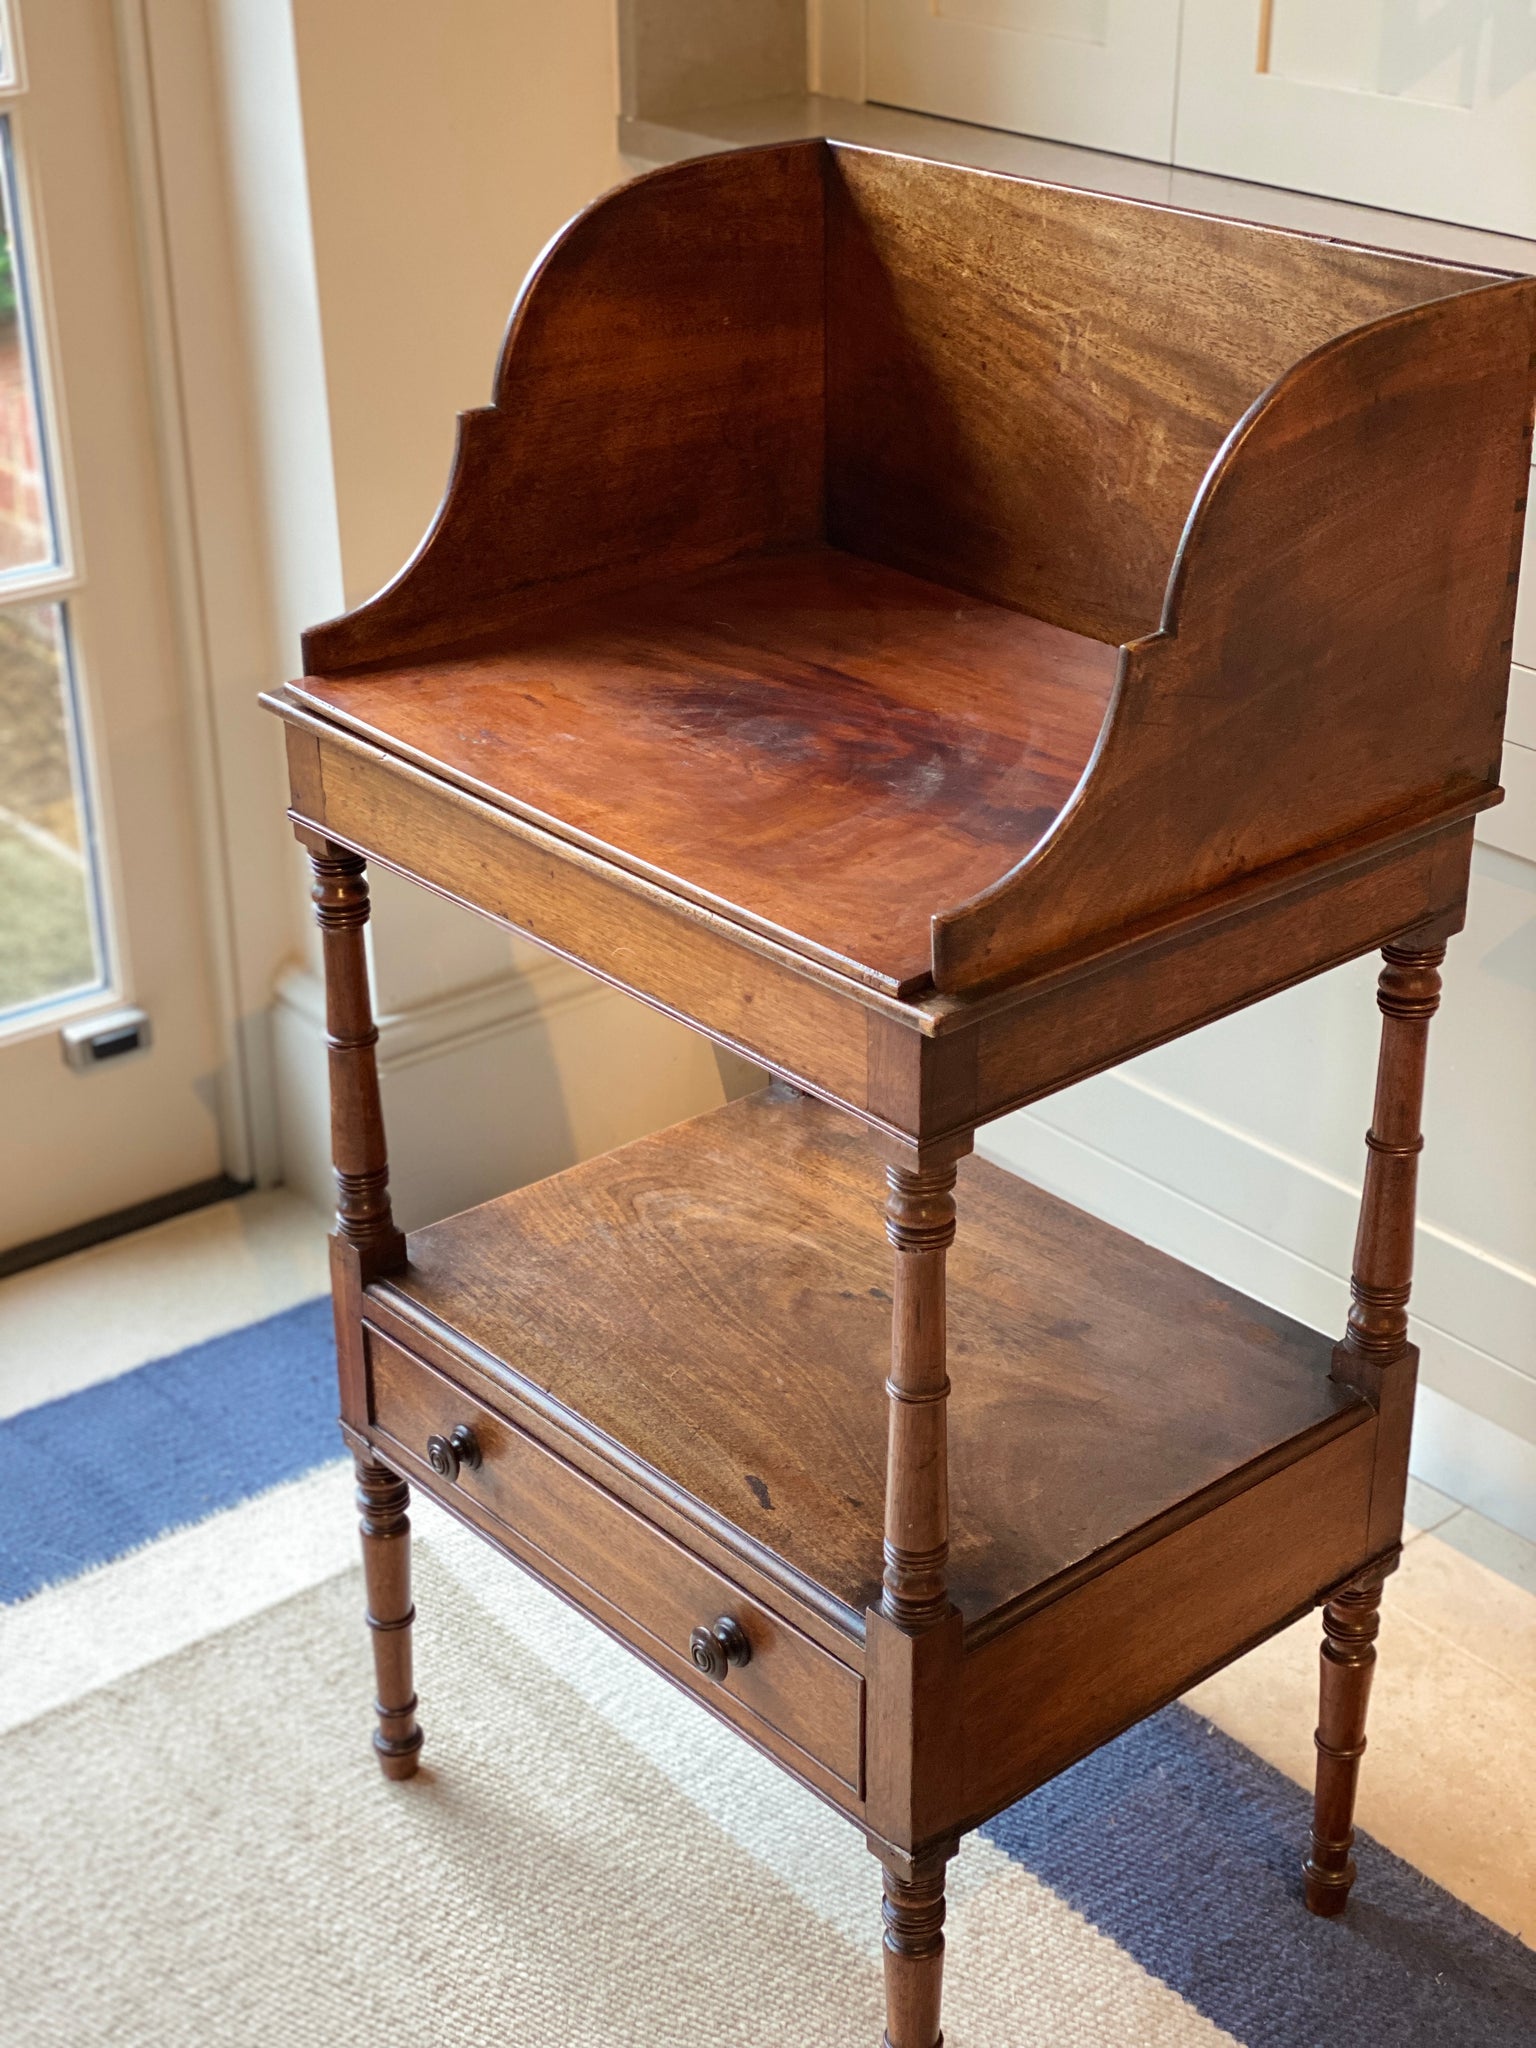 Lovely small Georgian washstand with drawer